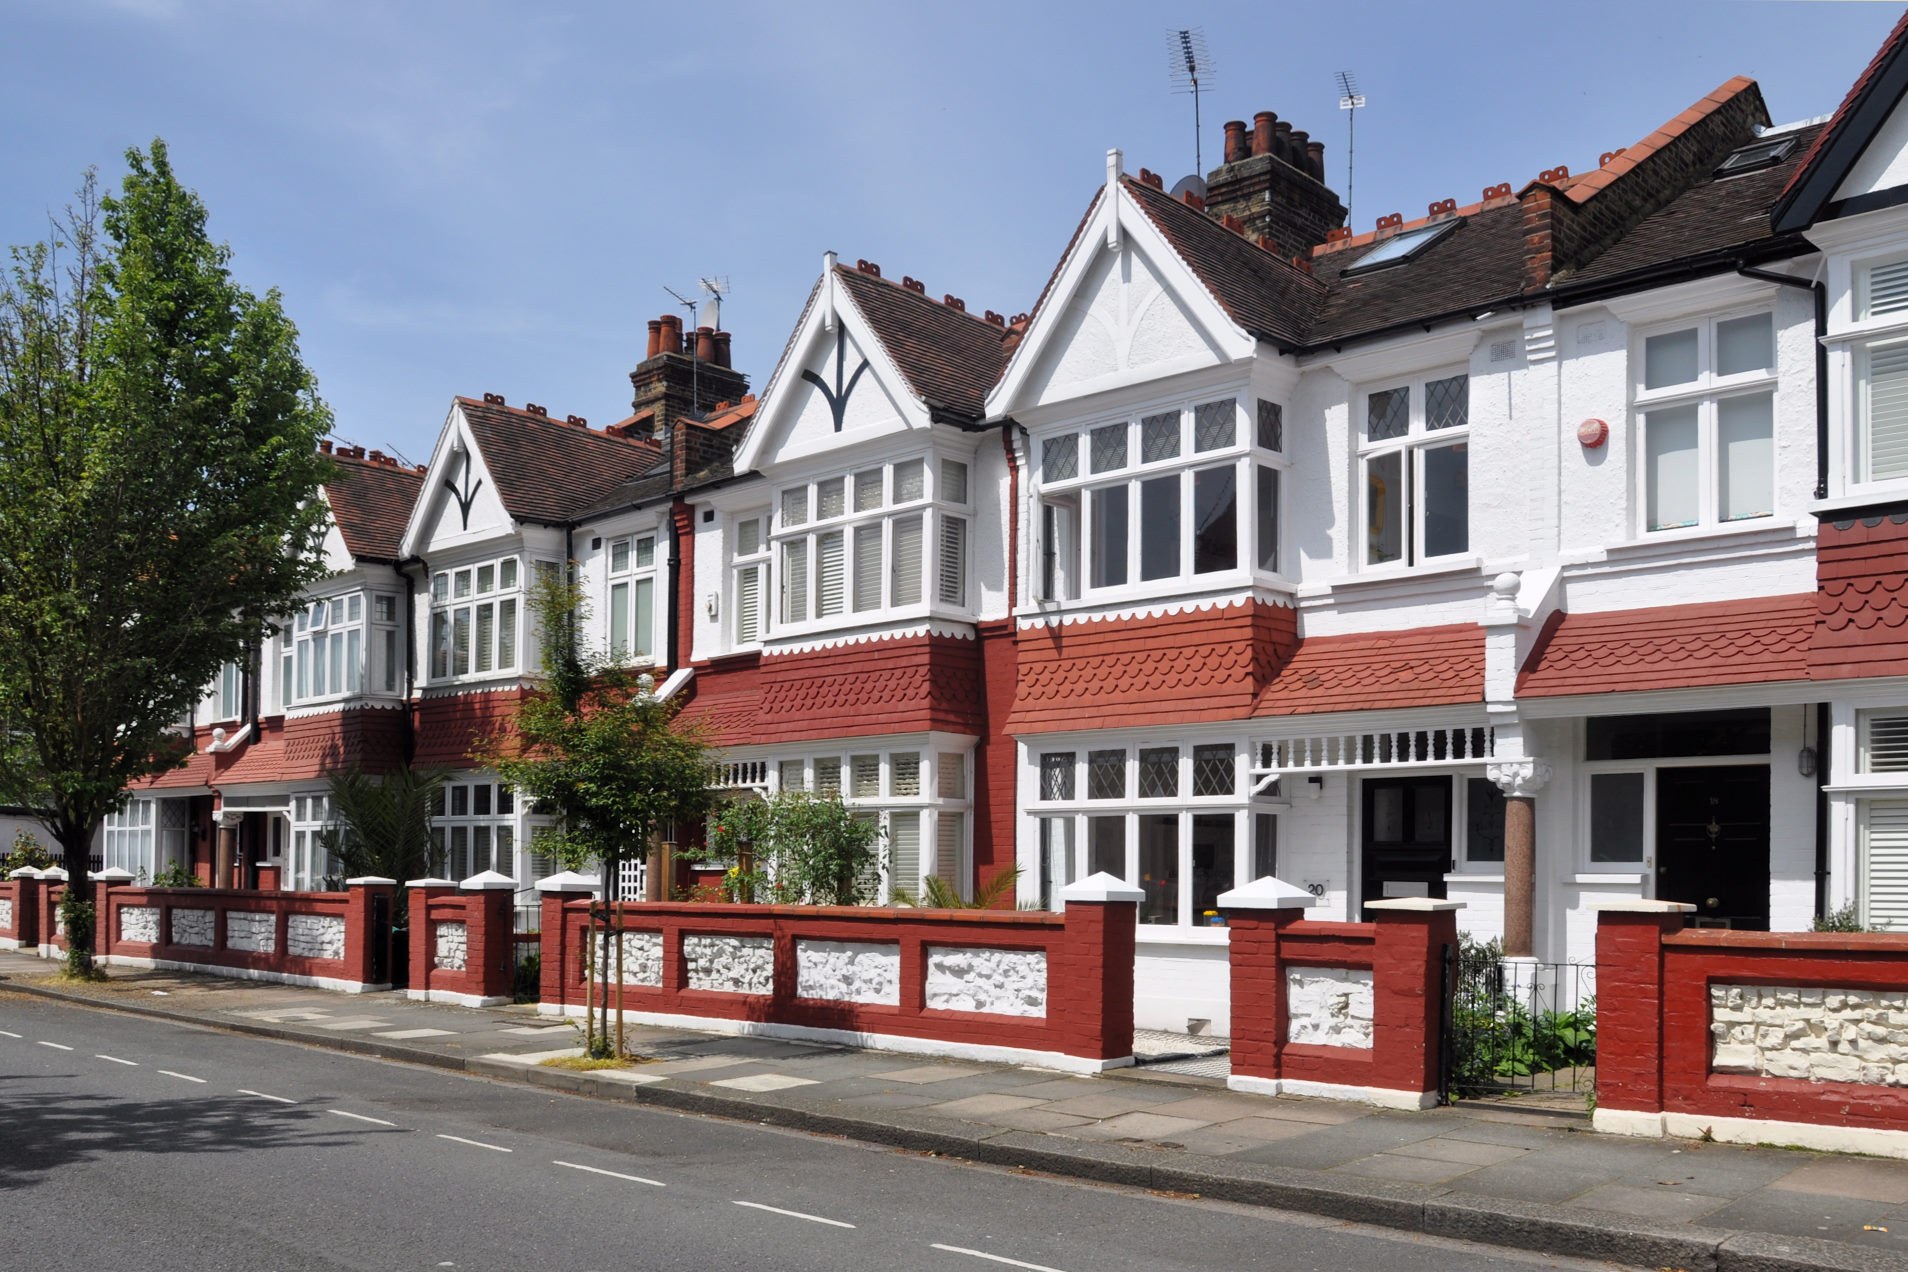 A row of terraced houses in London - Guide To Buying Your First House in London.